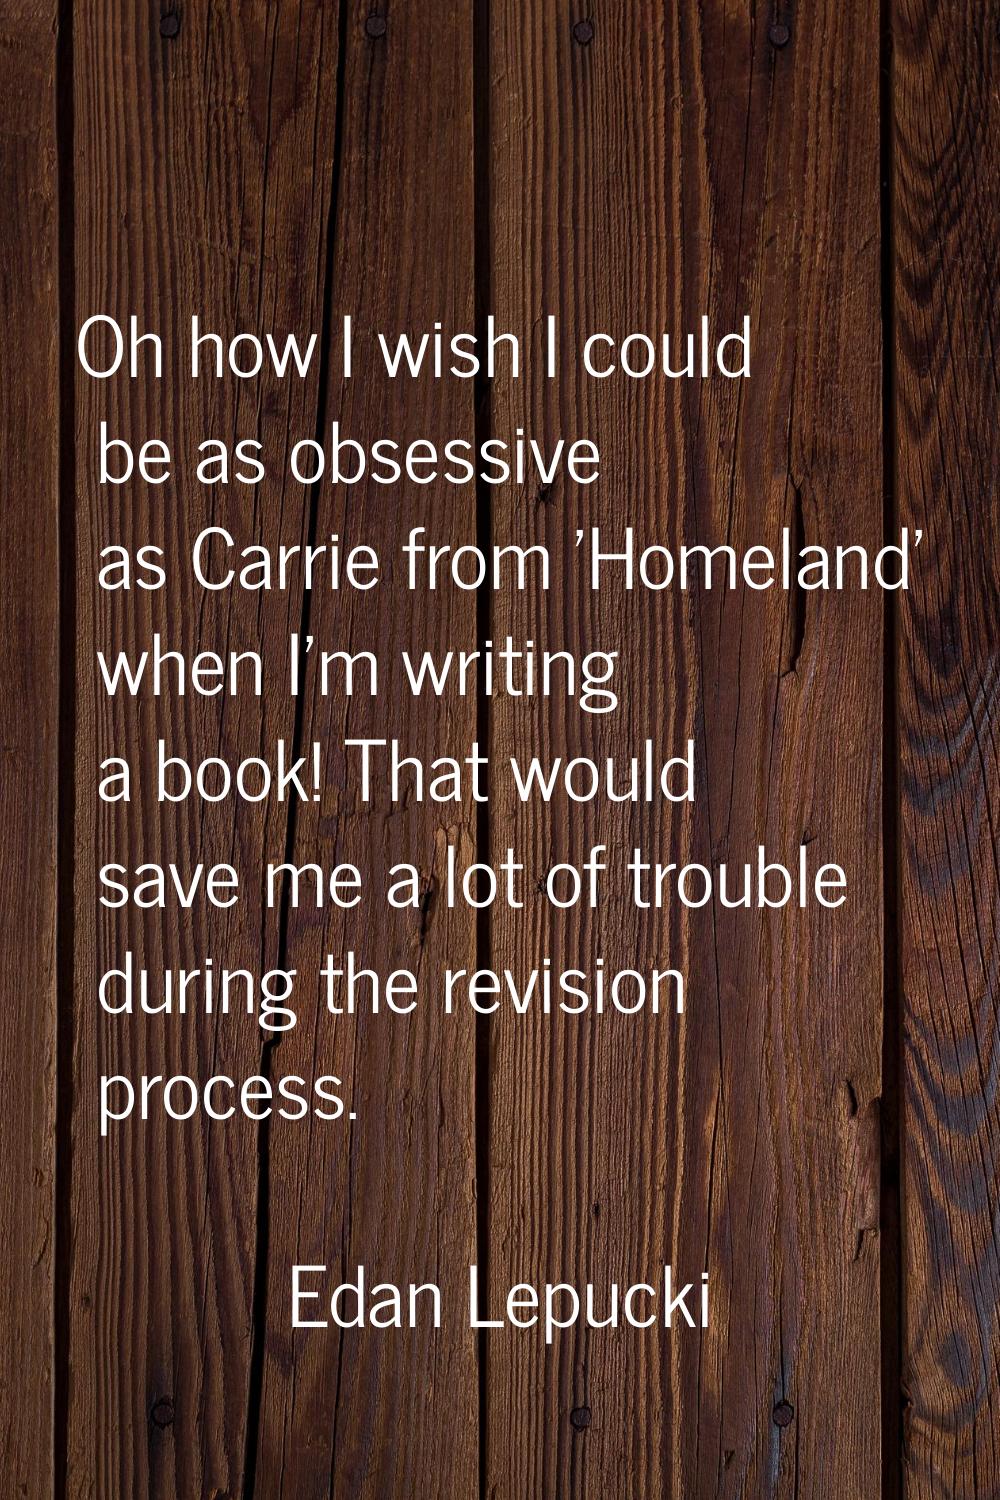 Oh how I wish I could be as obsessive as Carrie from 'Homeland' when I'm writing a book! That would